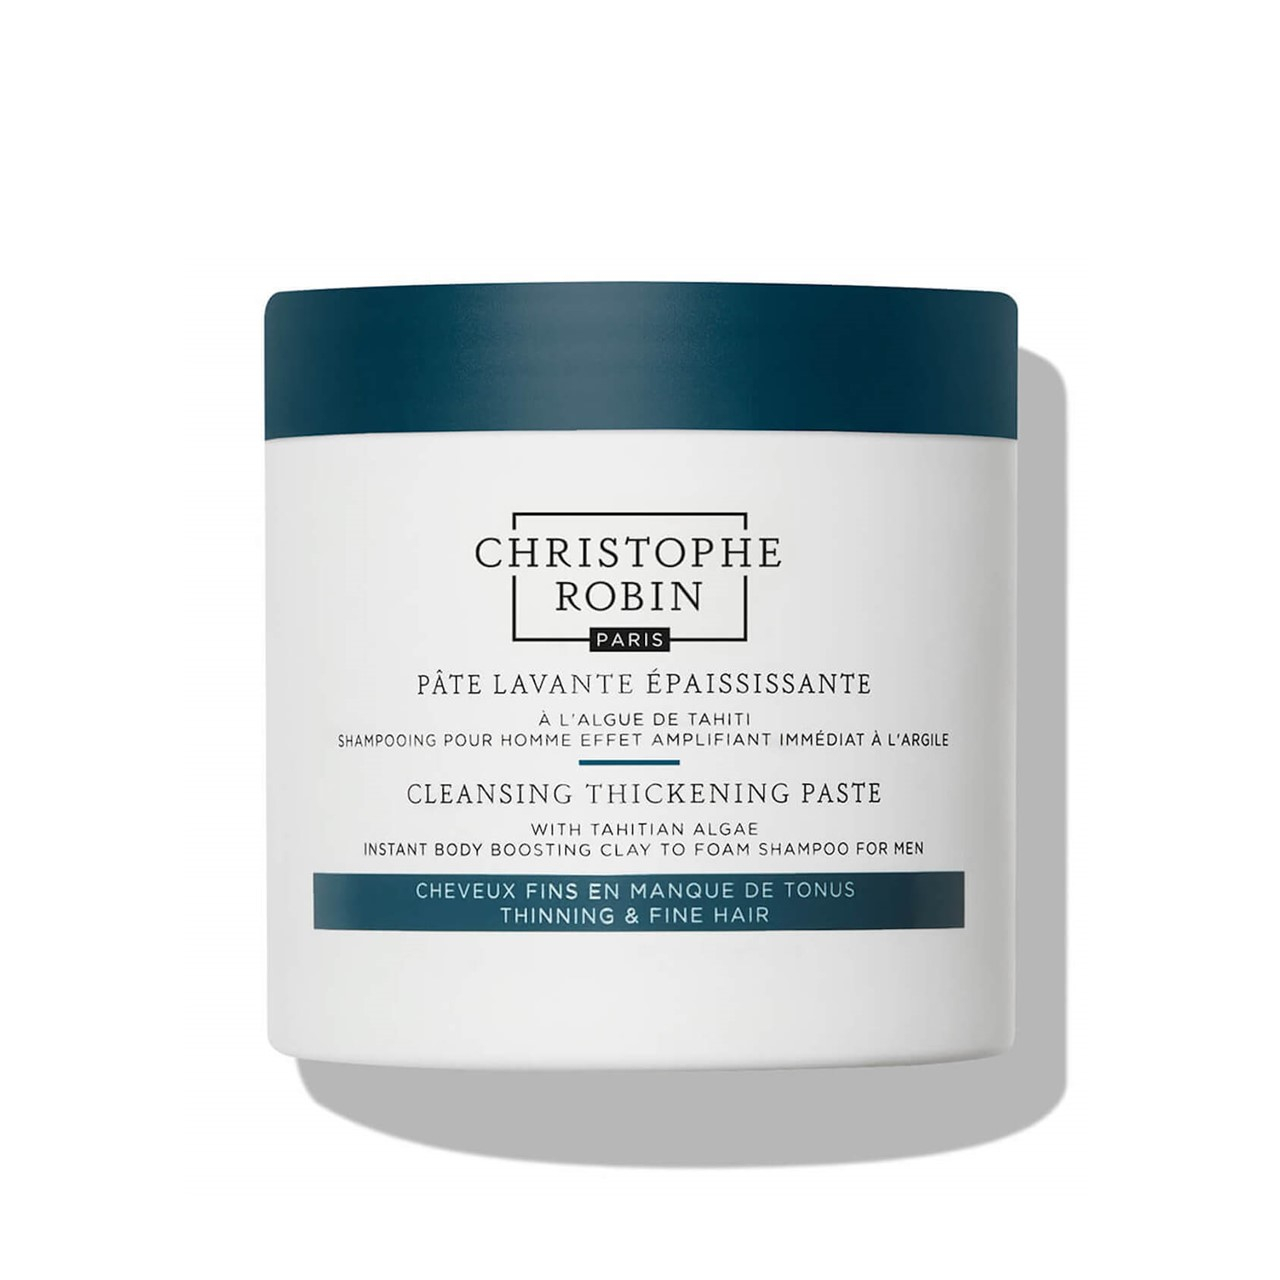 Christophe Robin Cleansing Thickening Paste 250ml